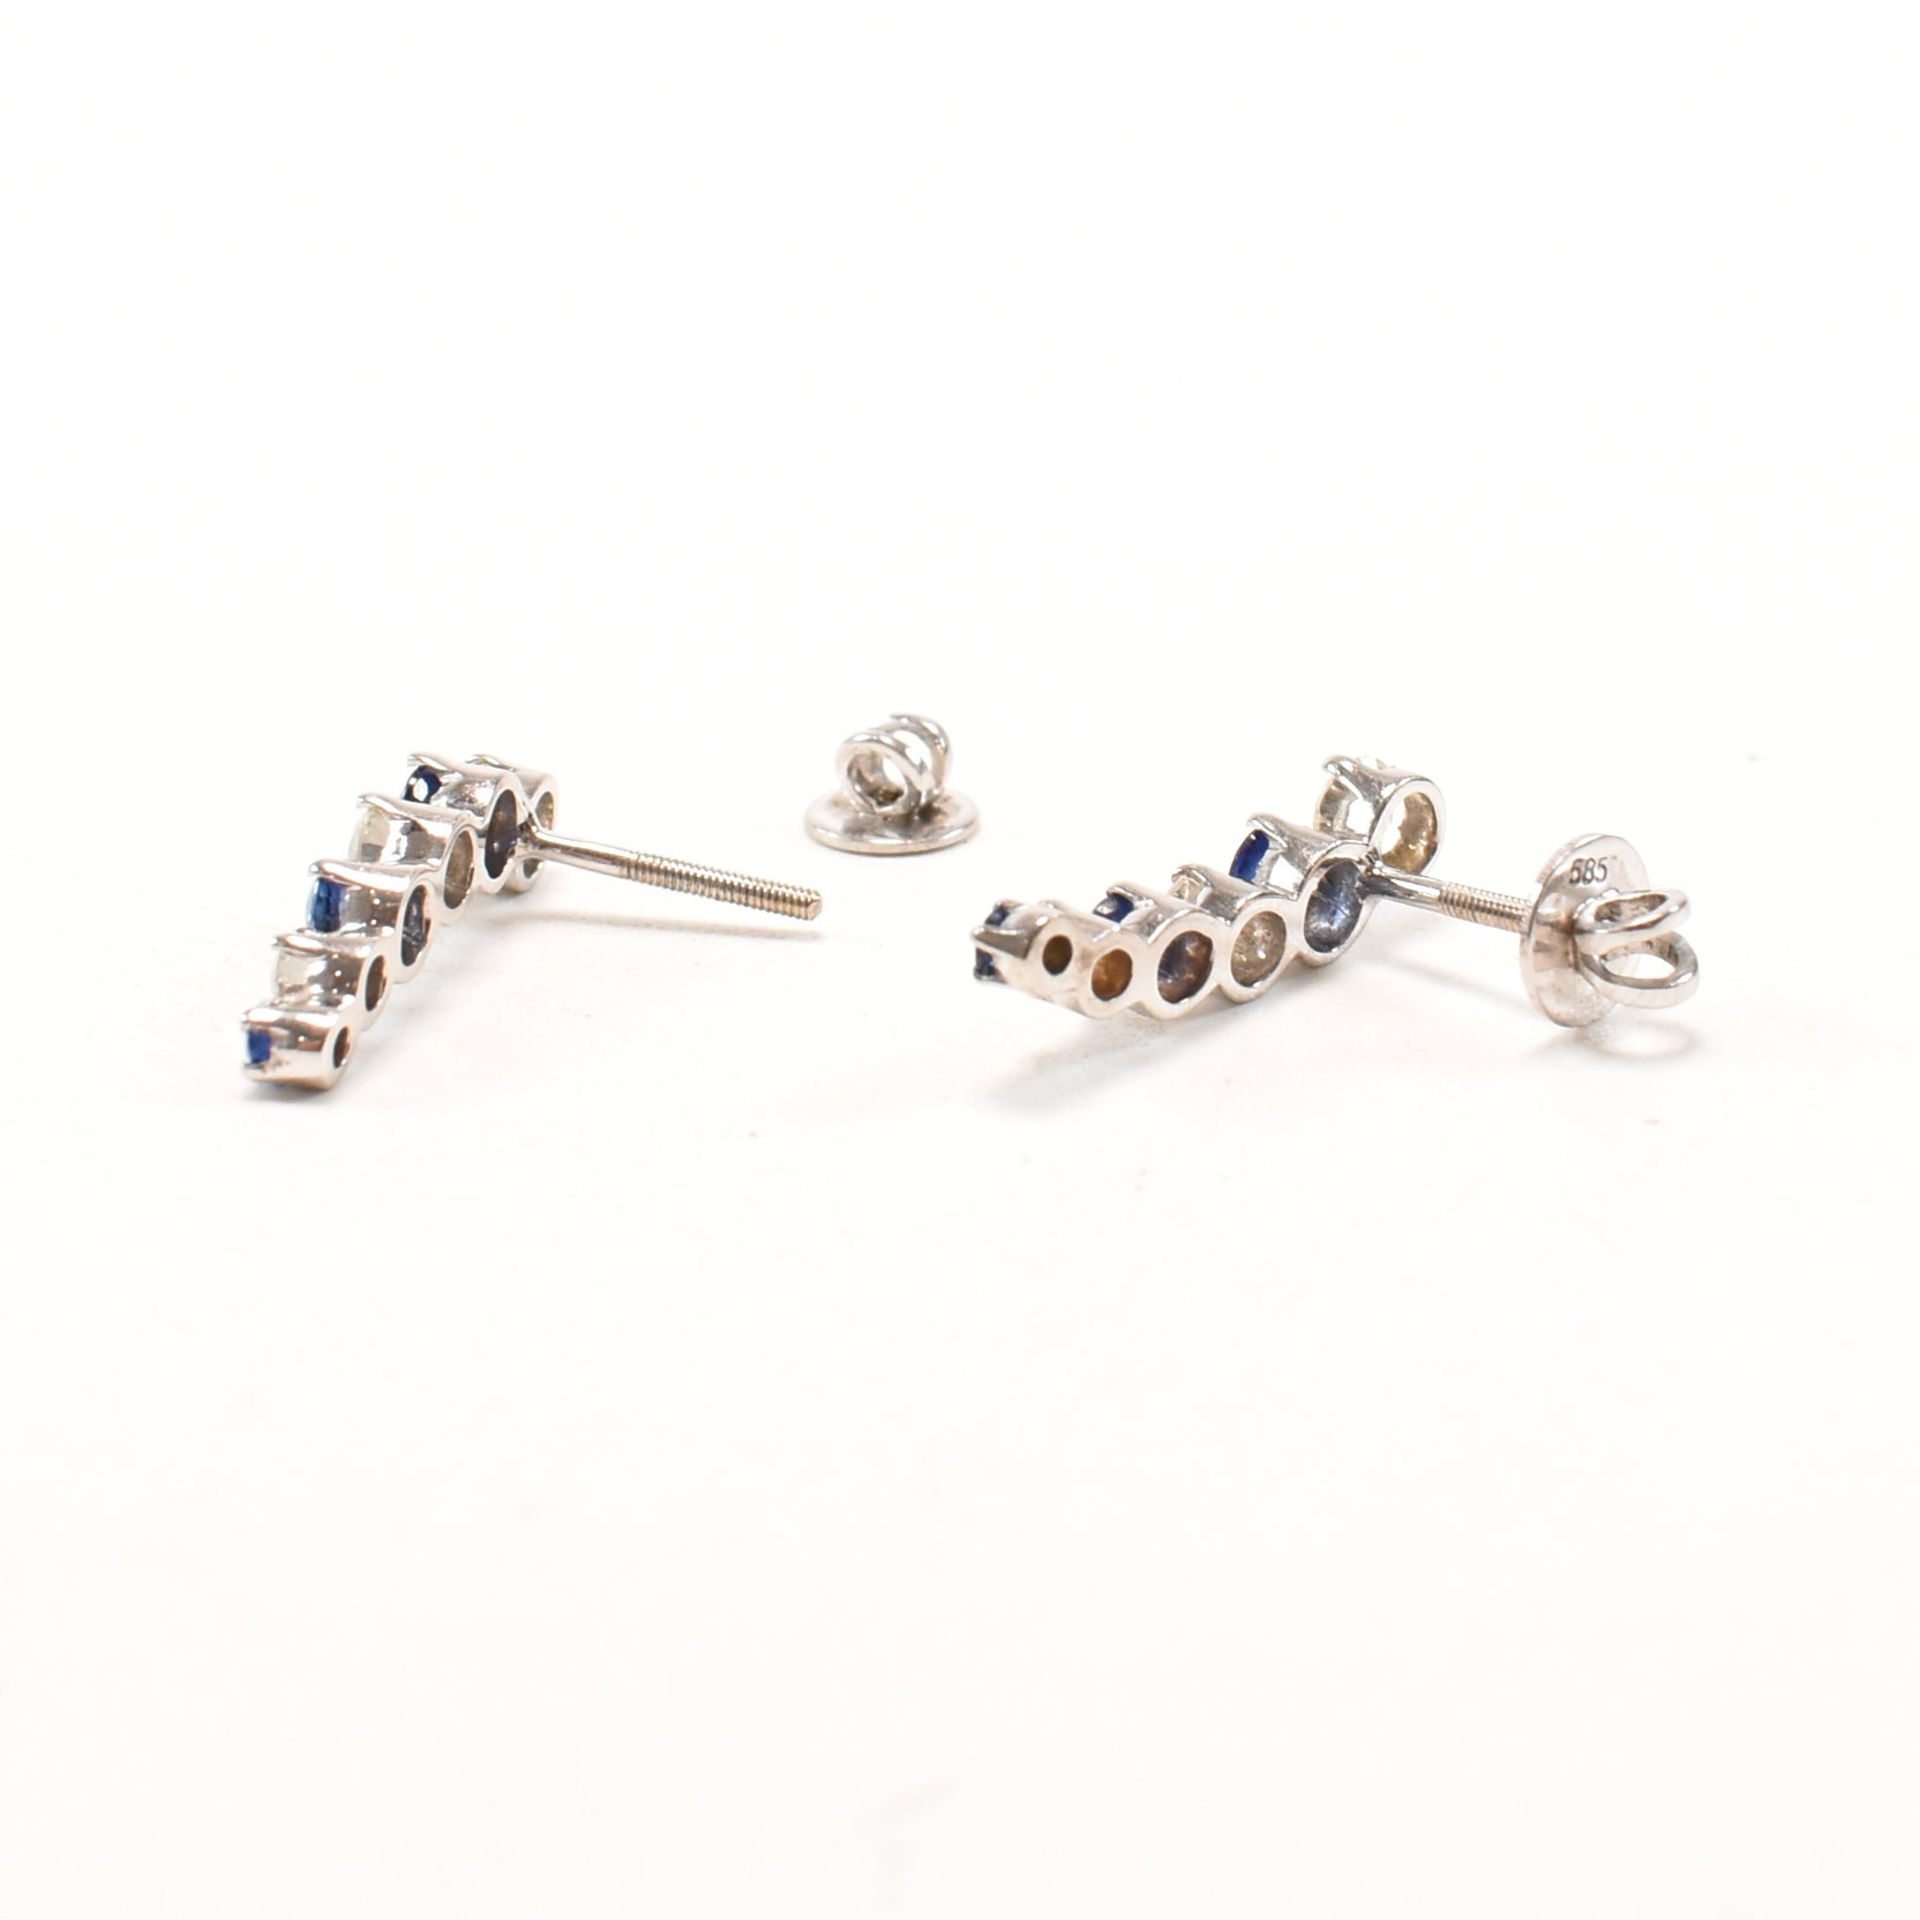 PAIR OF 14CT WHITE GOLD SAPPHIRE & DIAMOND EARRINGS - Image 6 of 8